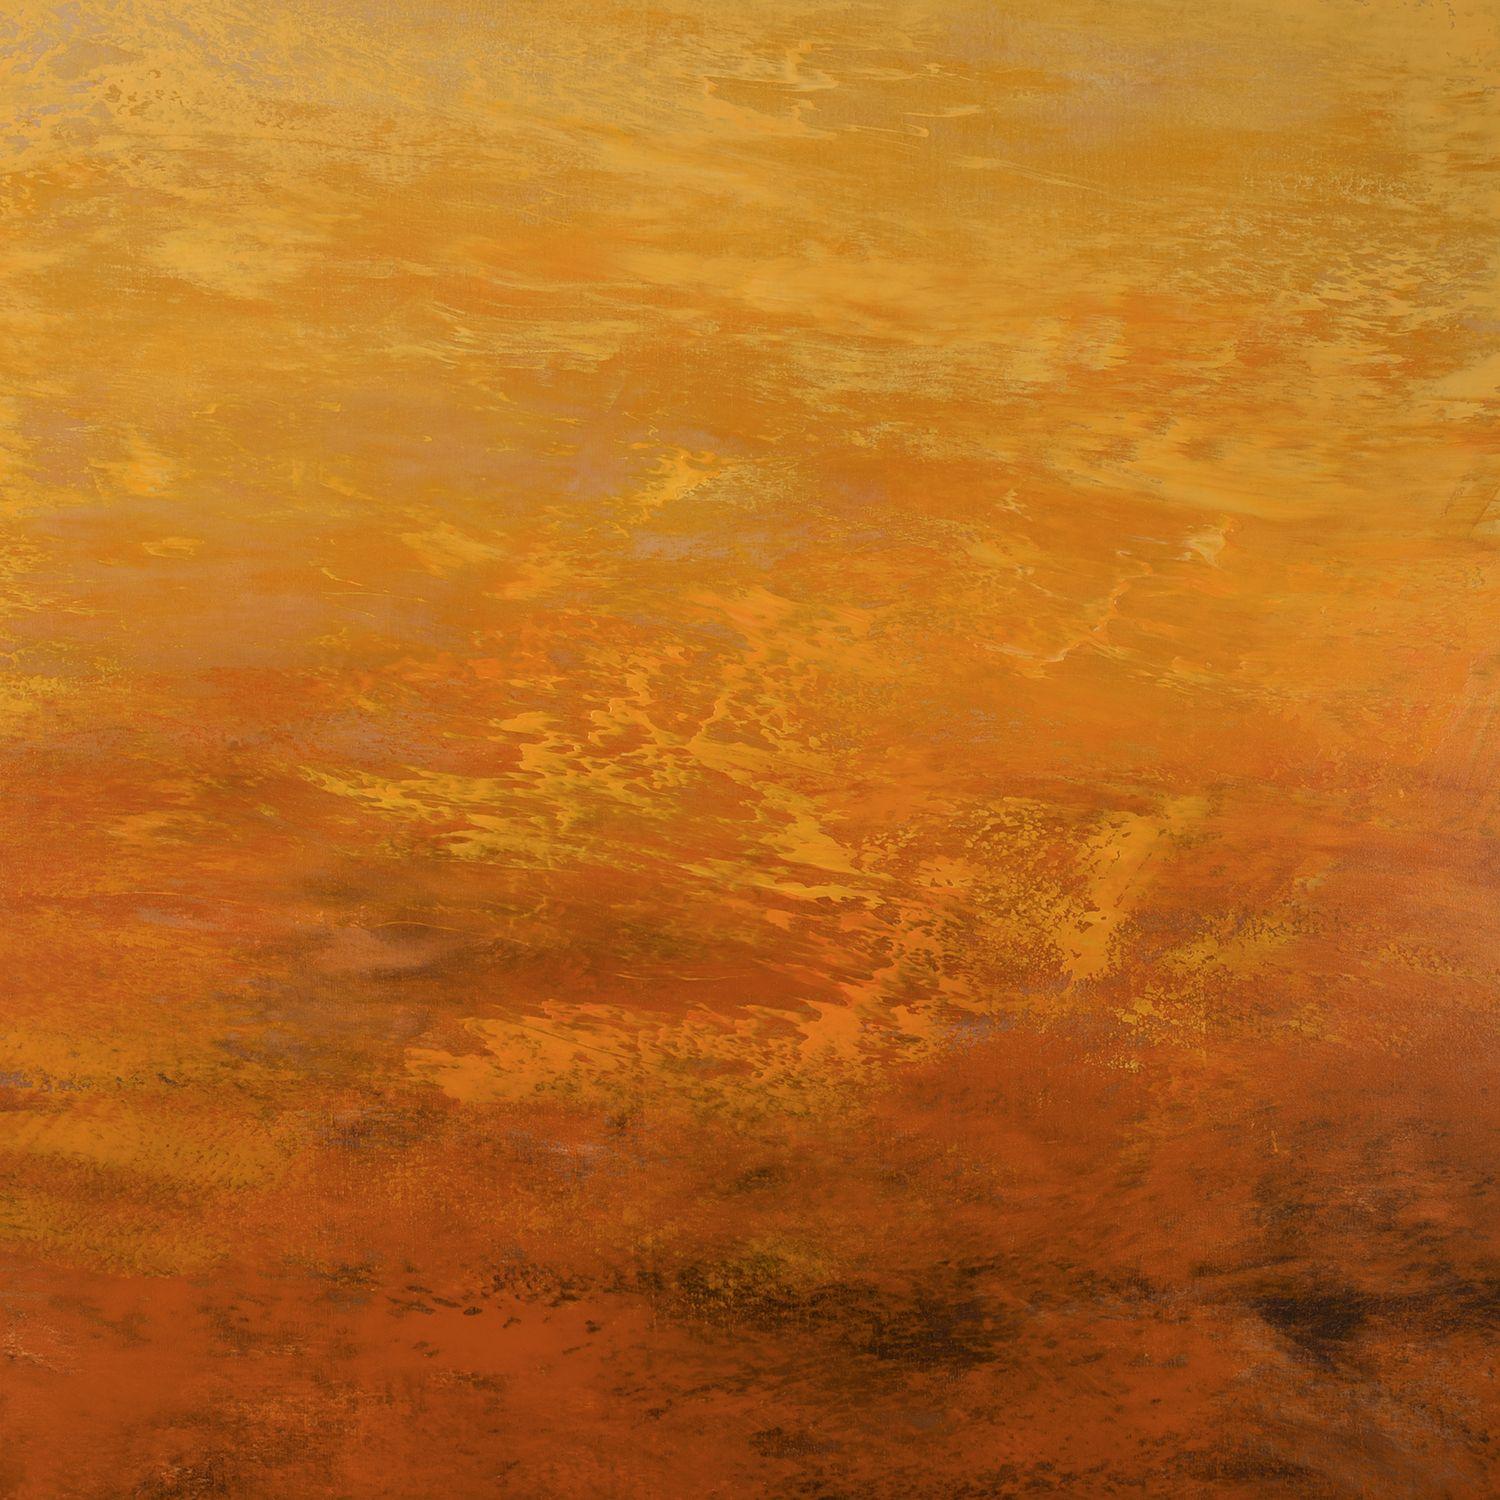 Vibrant Amber is an original acrylic painting on canvas by Suzanne Vaughan. An abstract expressionist style painting with thick layers of paint and textural transitions of warm rich honey golden colors. Painted on a piece of 48â€